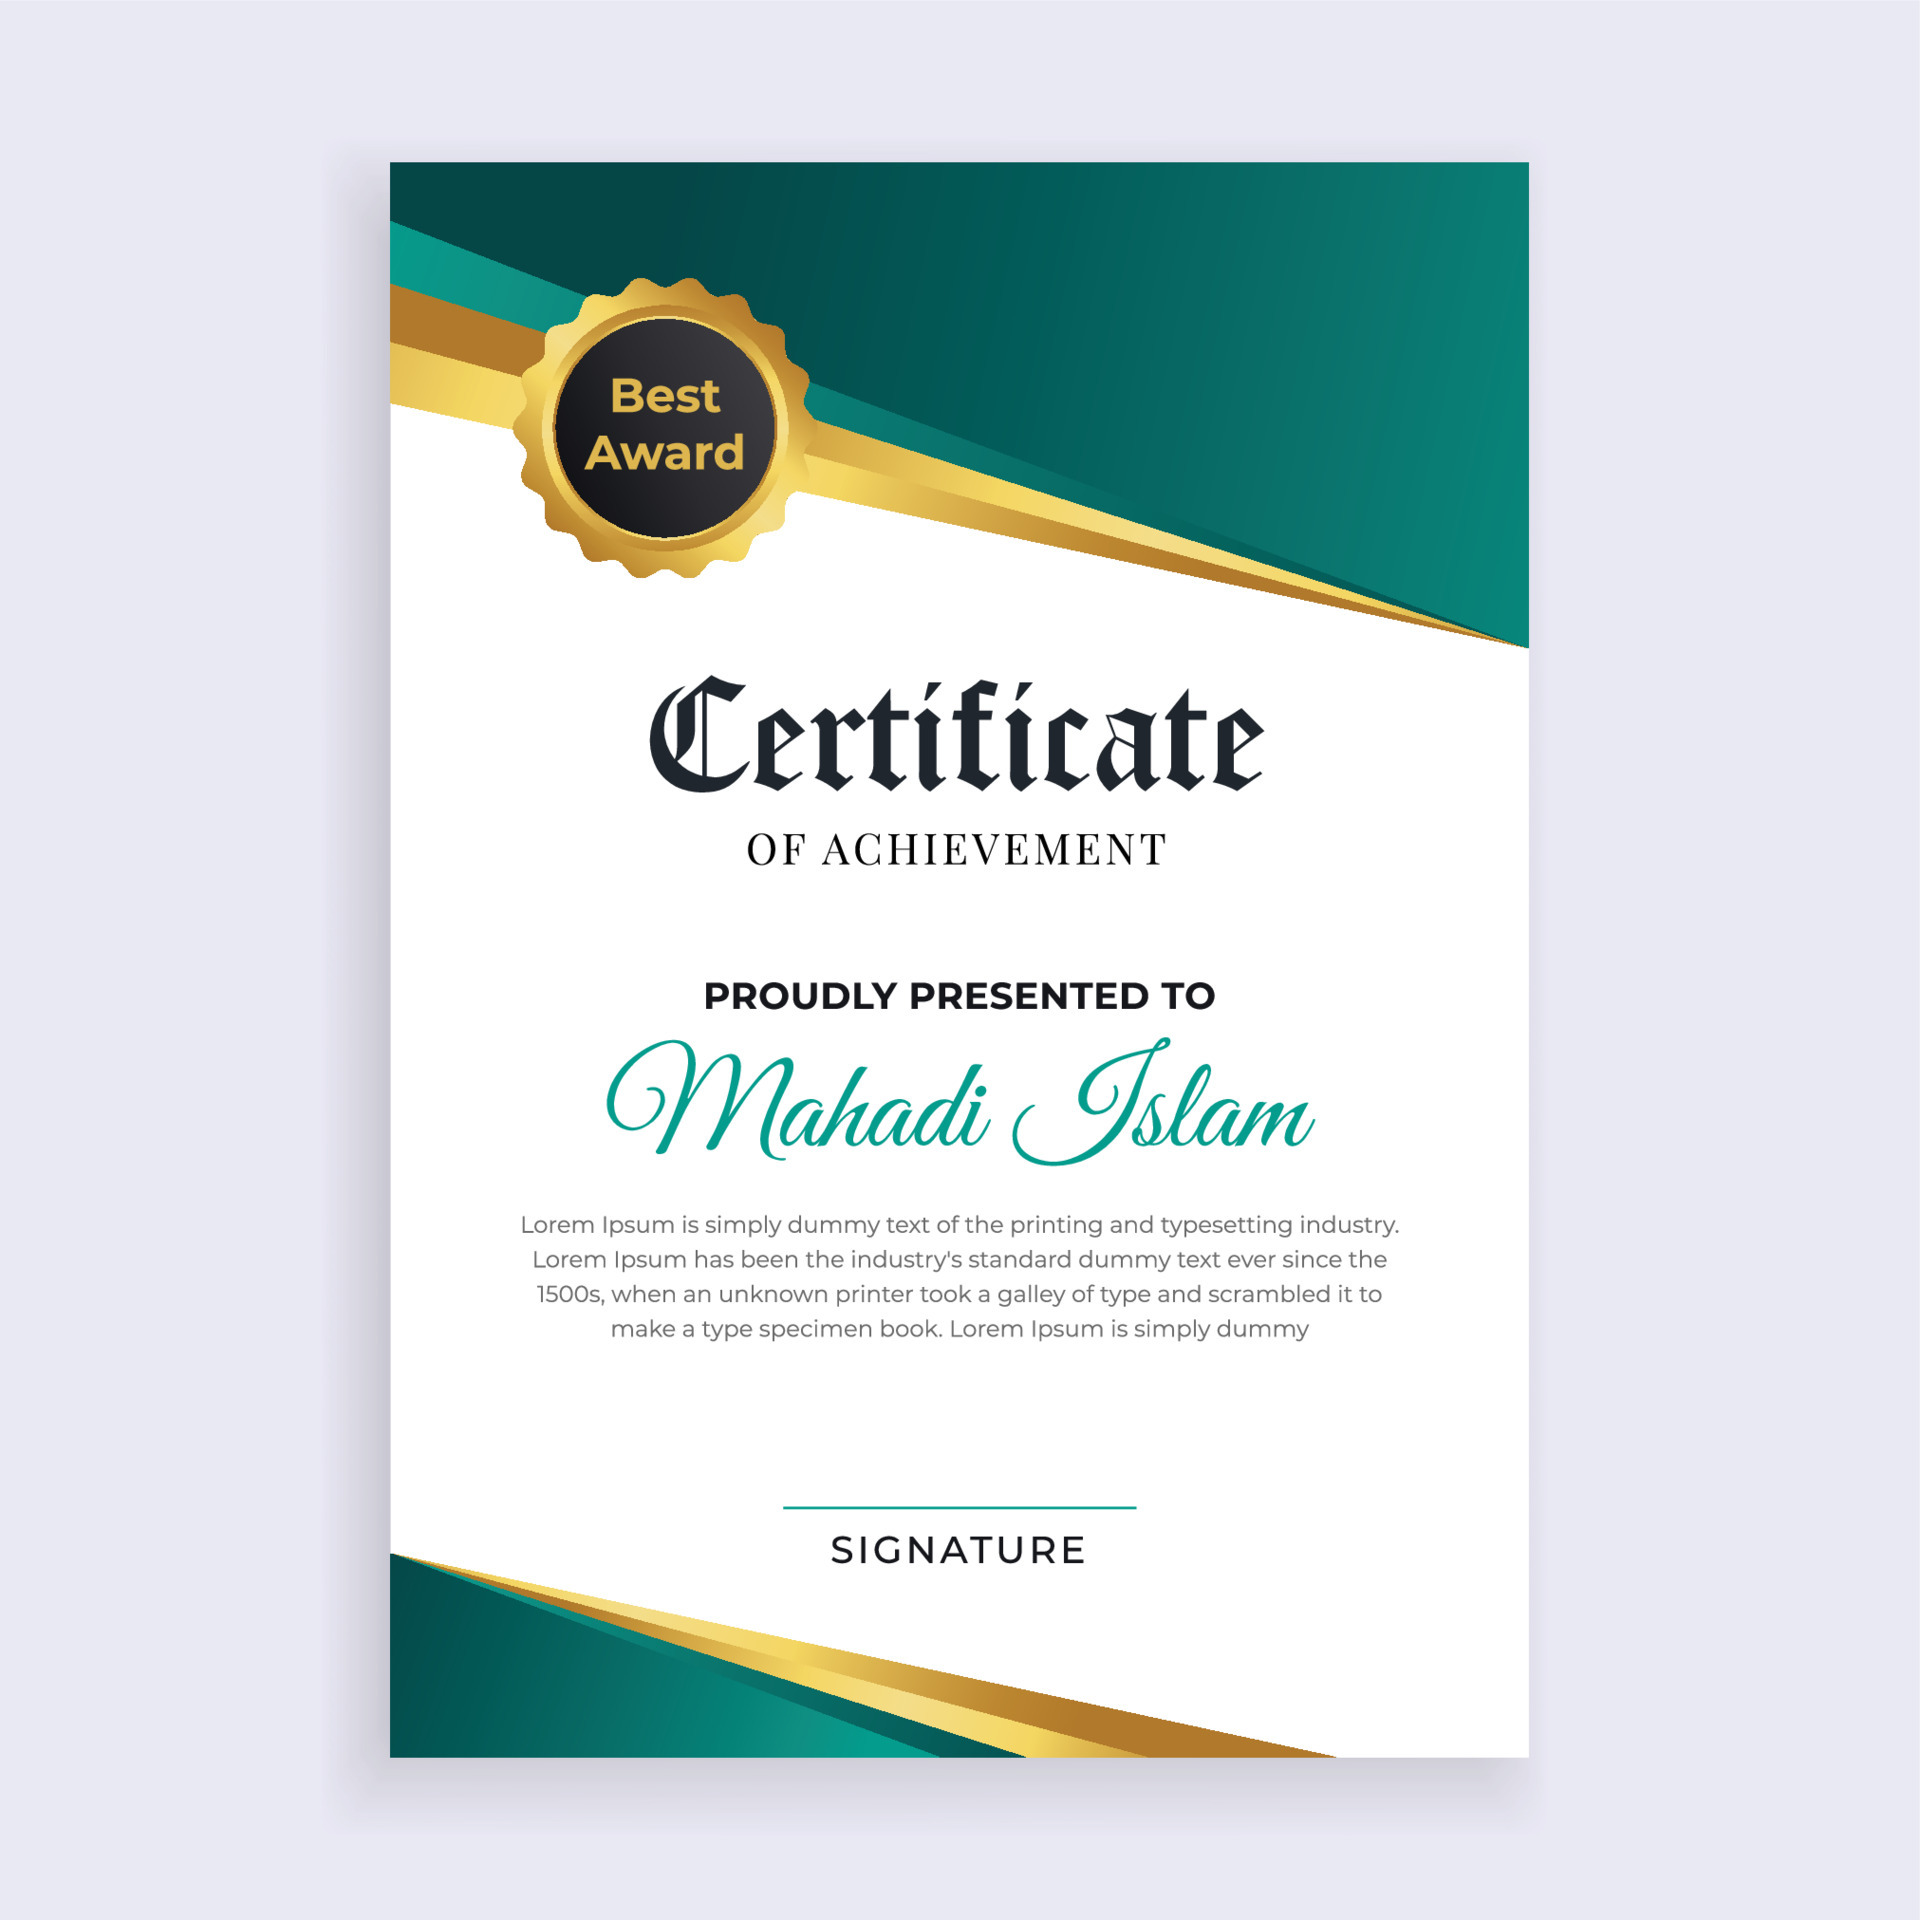 Editable Certificate Free Printable Military Certificate Of Appreciation Template Free